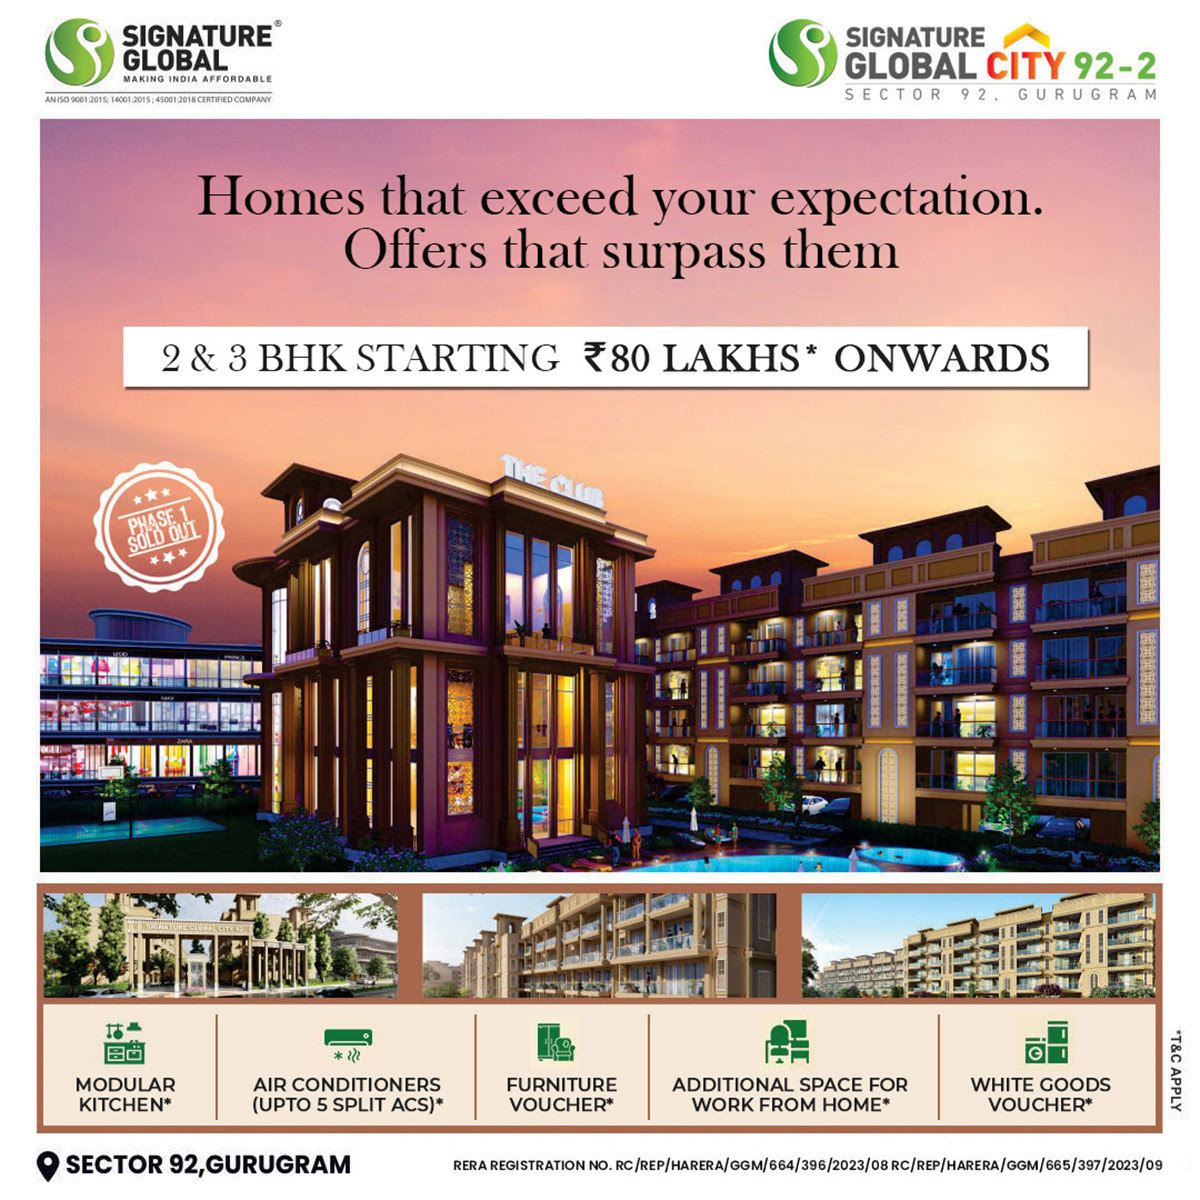 Book just Rs 1 Lac now, free modular kitchen, furniture voucher and white goods voucher at Signature Global City 92-2, Gurgaon